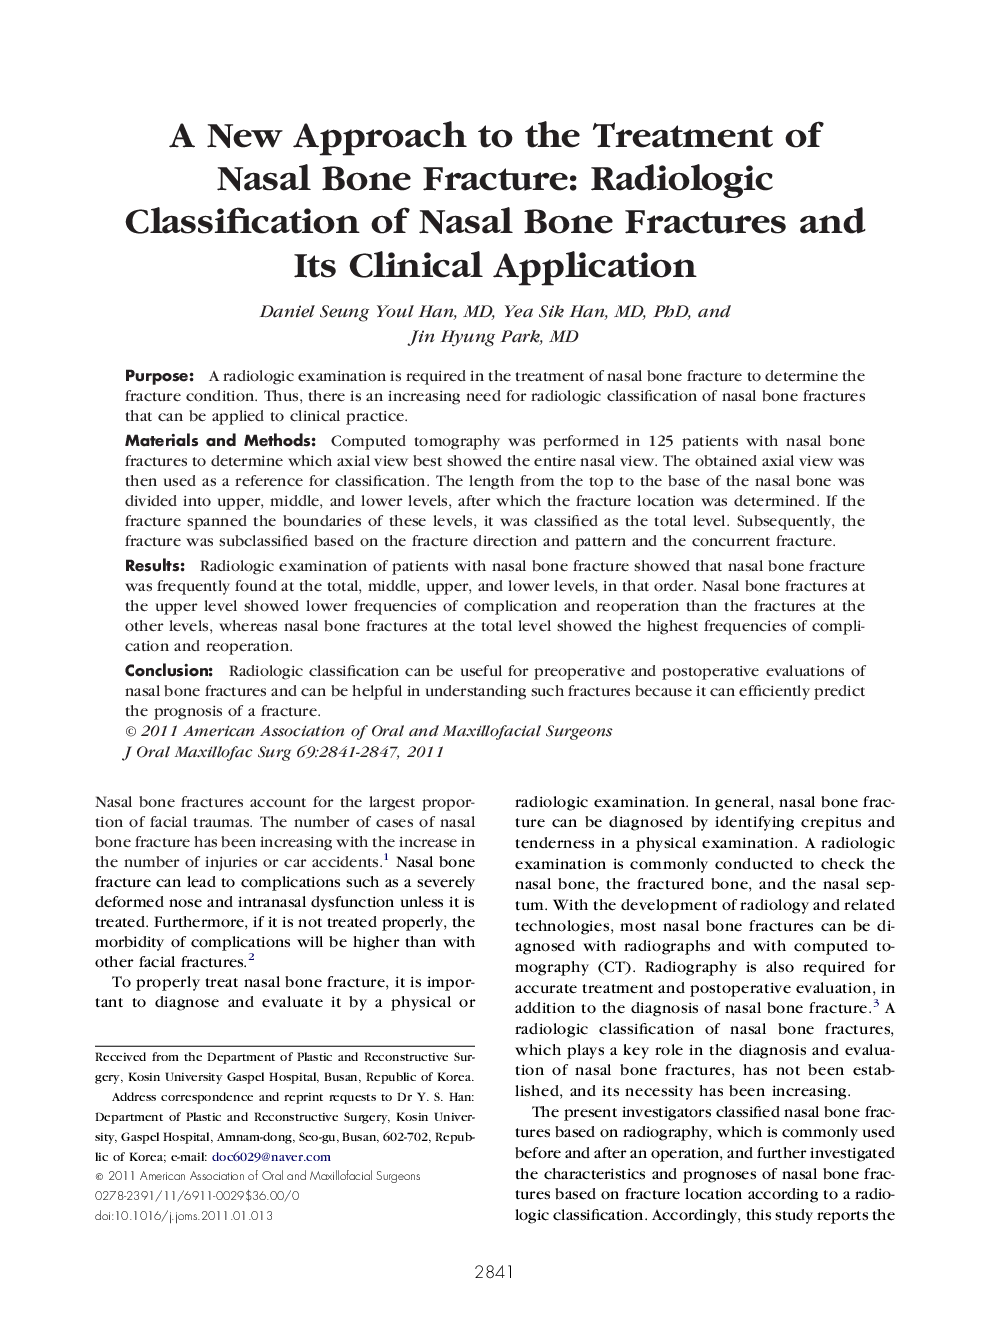 A New Approach to the Treatment of Nasal Bone Fracture: Radiologic Classification of Nasal Bone Fractures and Its Clinical Application